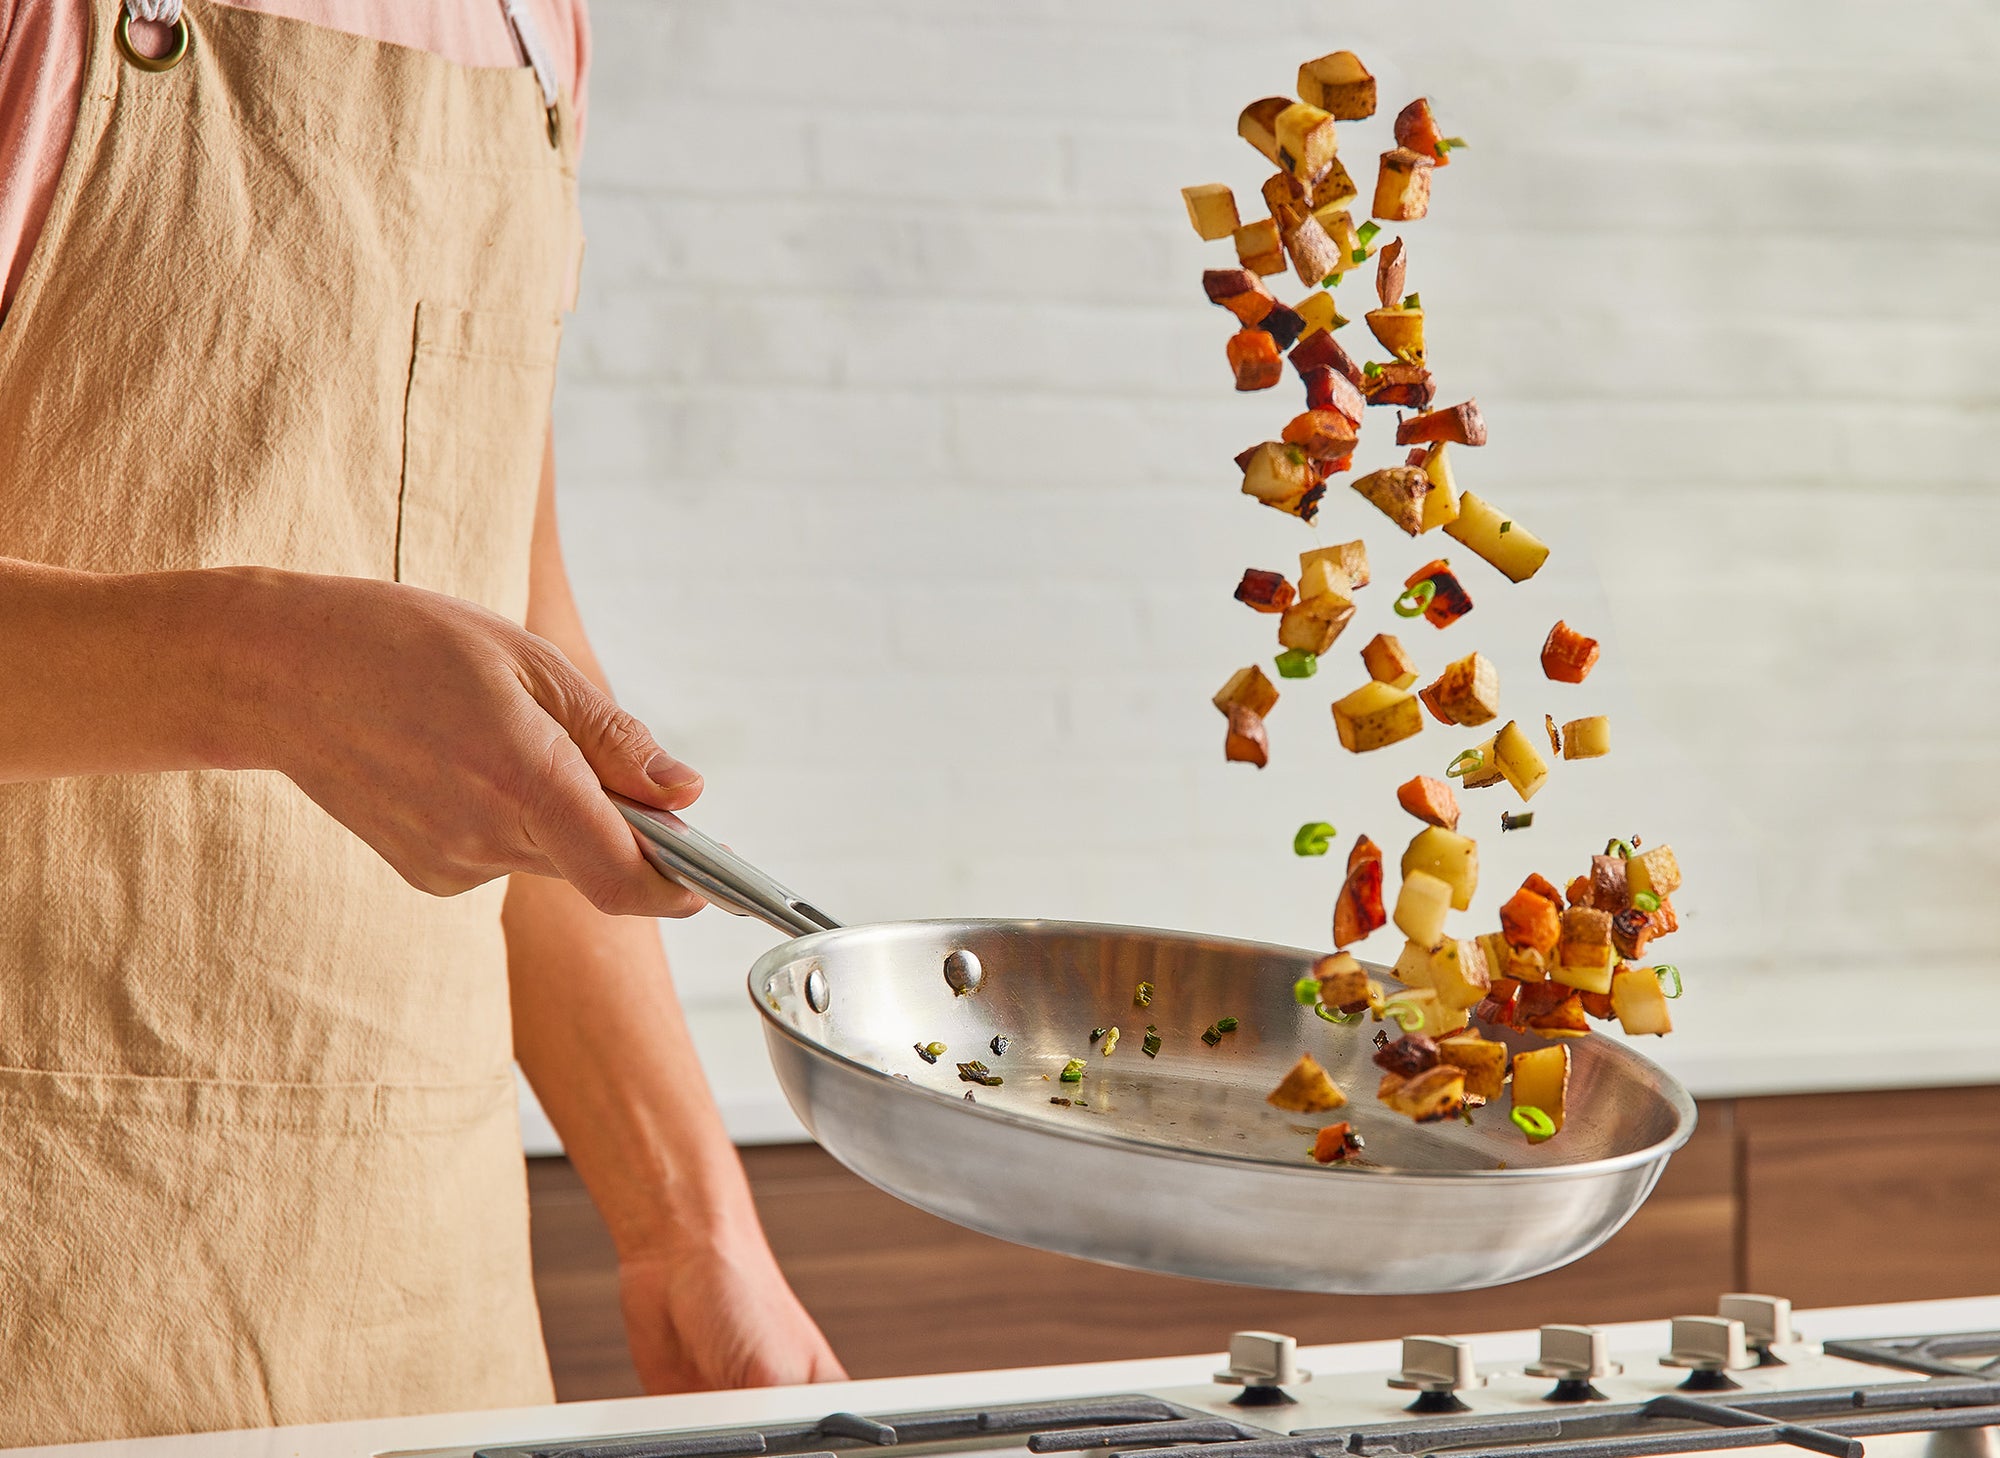 A chef uses a Misen Stainless Steel Pan to toss roasted root vegetables over a stovetop.